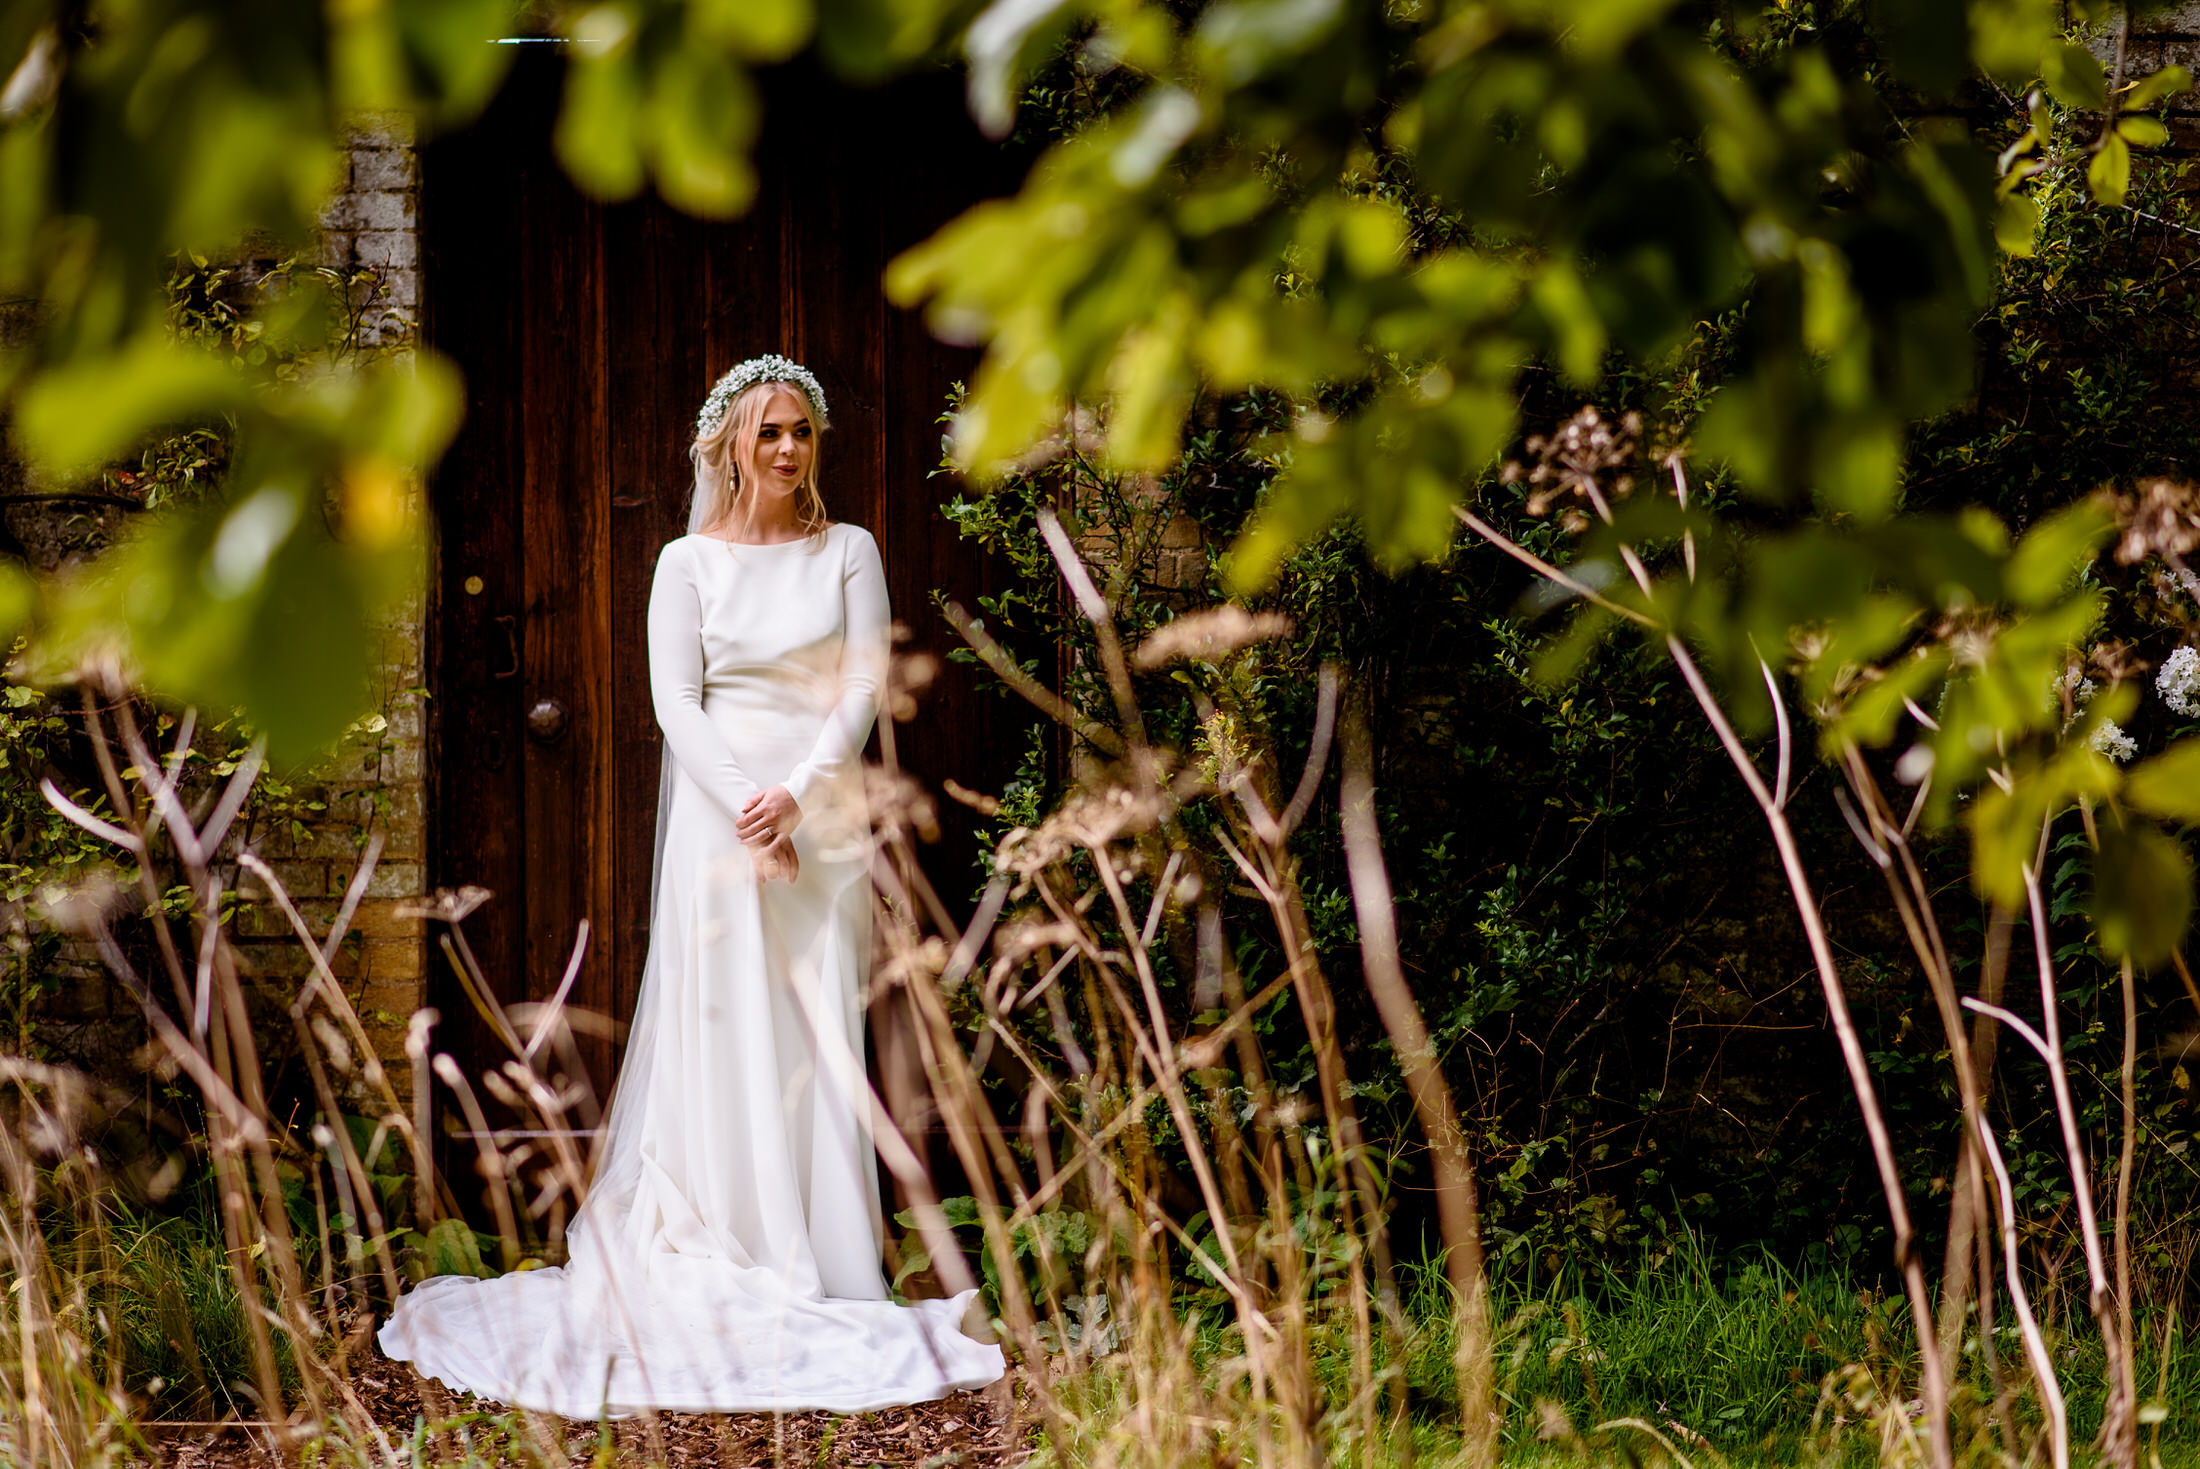 A wedding bride in a white dress standing in tall grass at Scrivelsby Walled Garden.